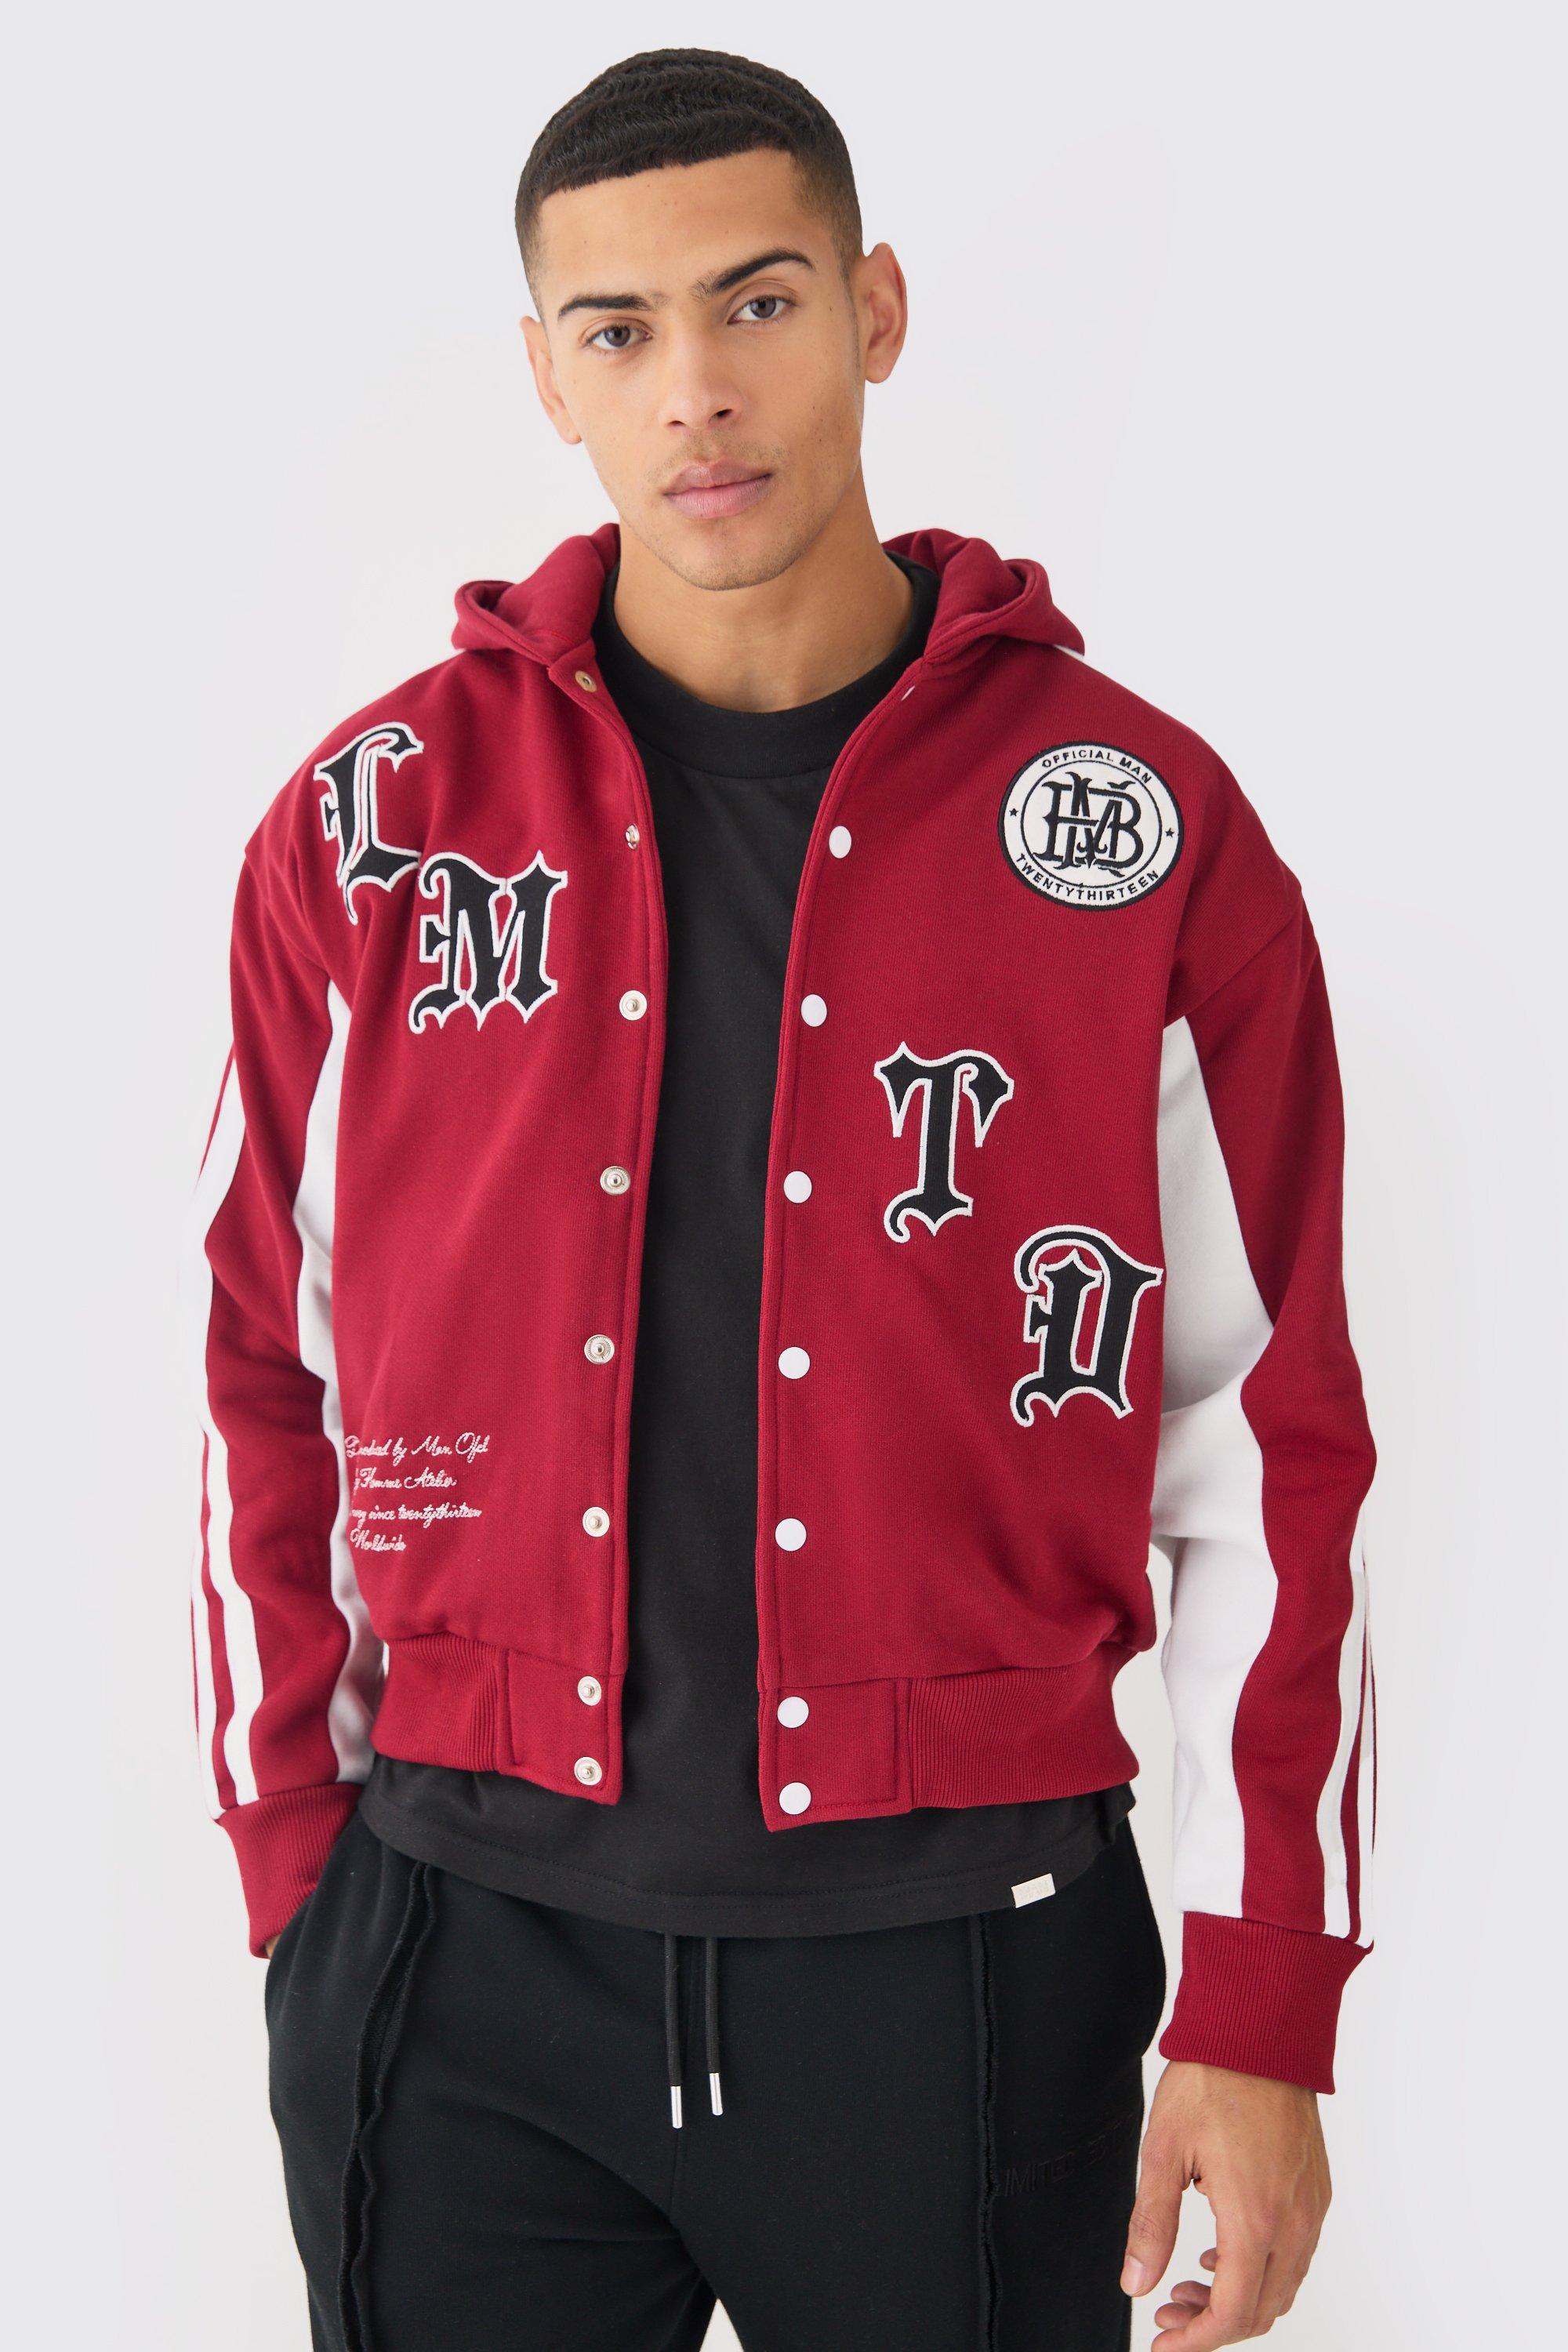 Image of Boxy Applique Tape Detail Jersey Varisty Jacket, Rosso